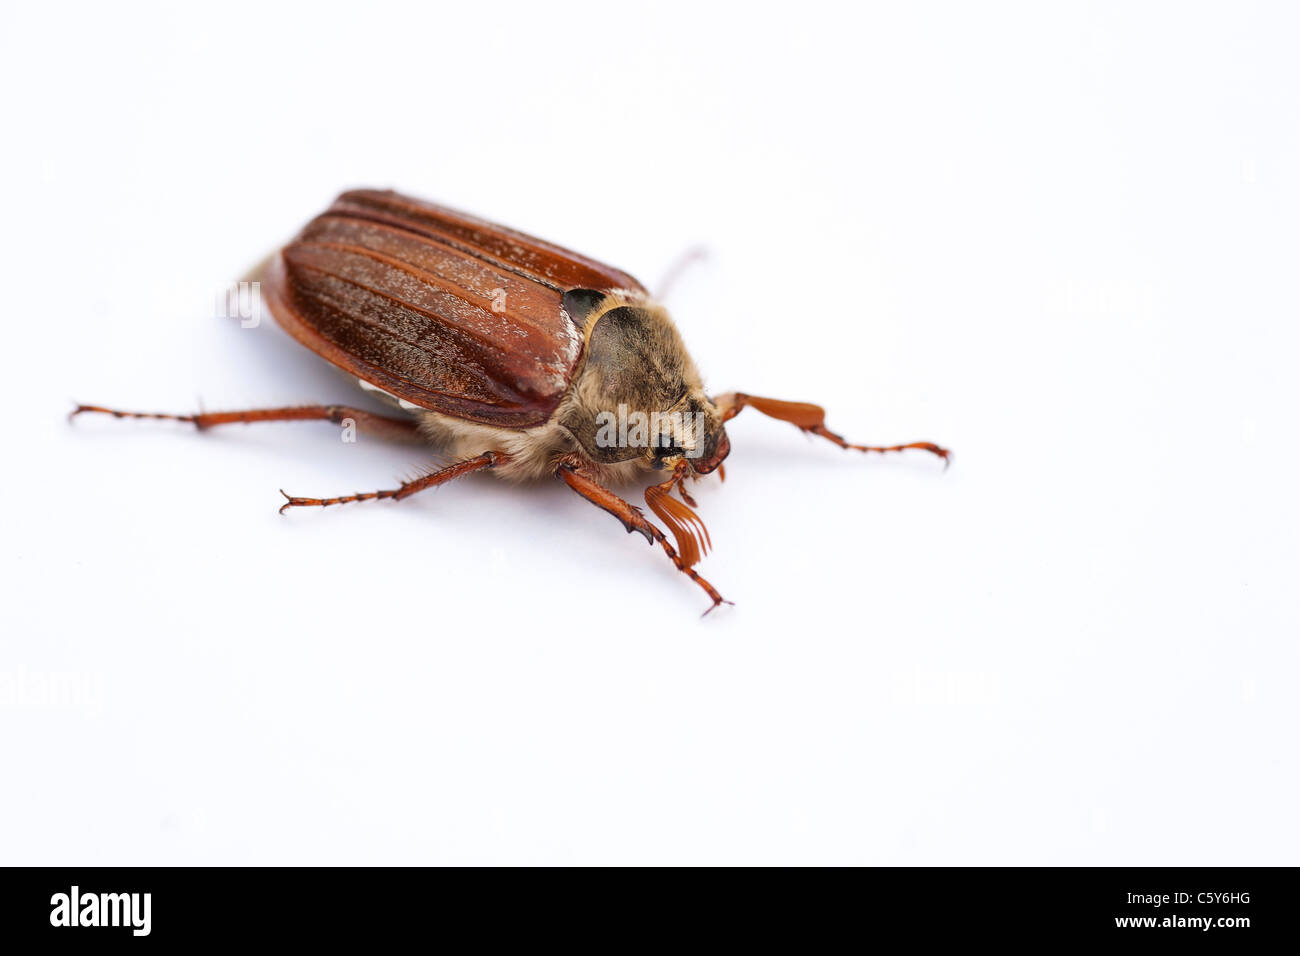 'Melolontha melolontha'. Cockchafer Beetle on white background Stock Photo